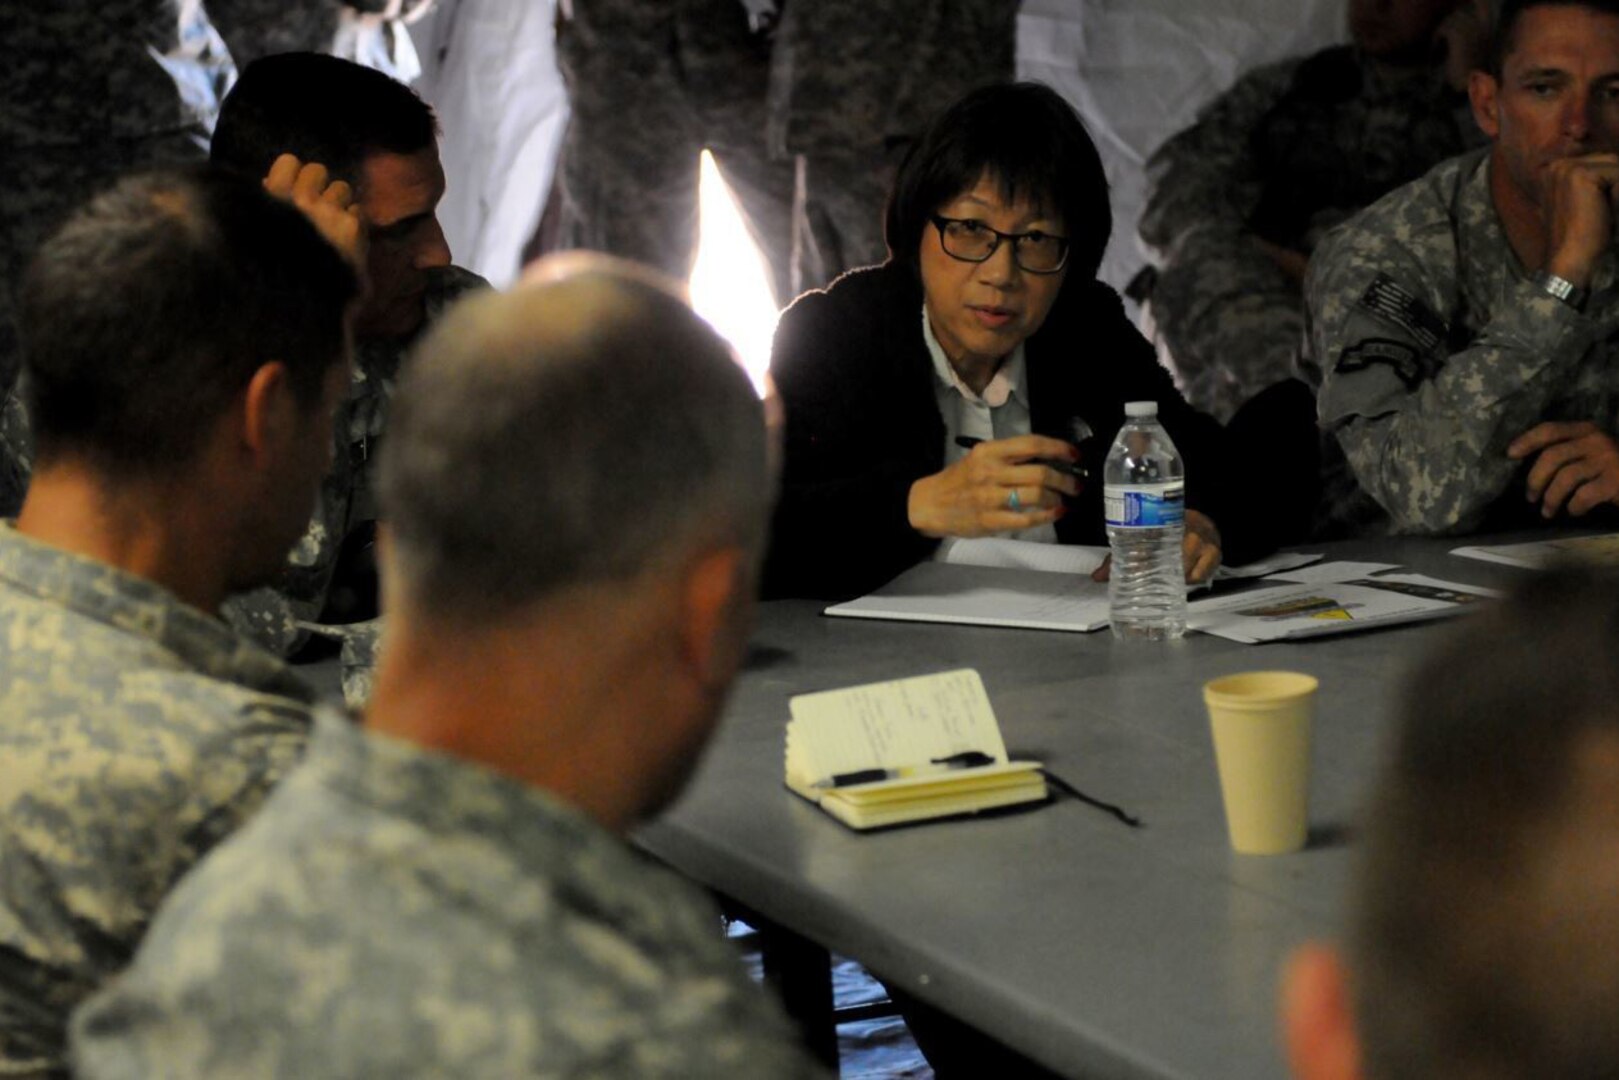 A woman sits at a table surrounded by men in uniform.